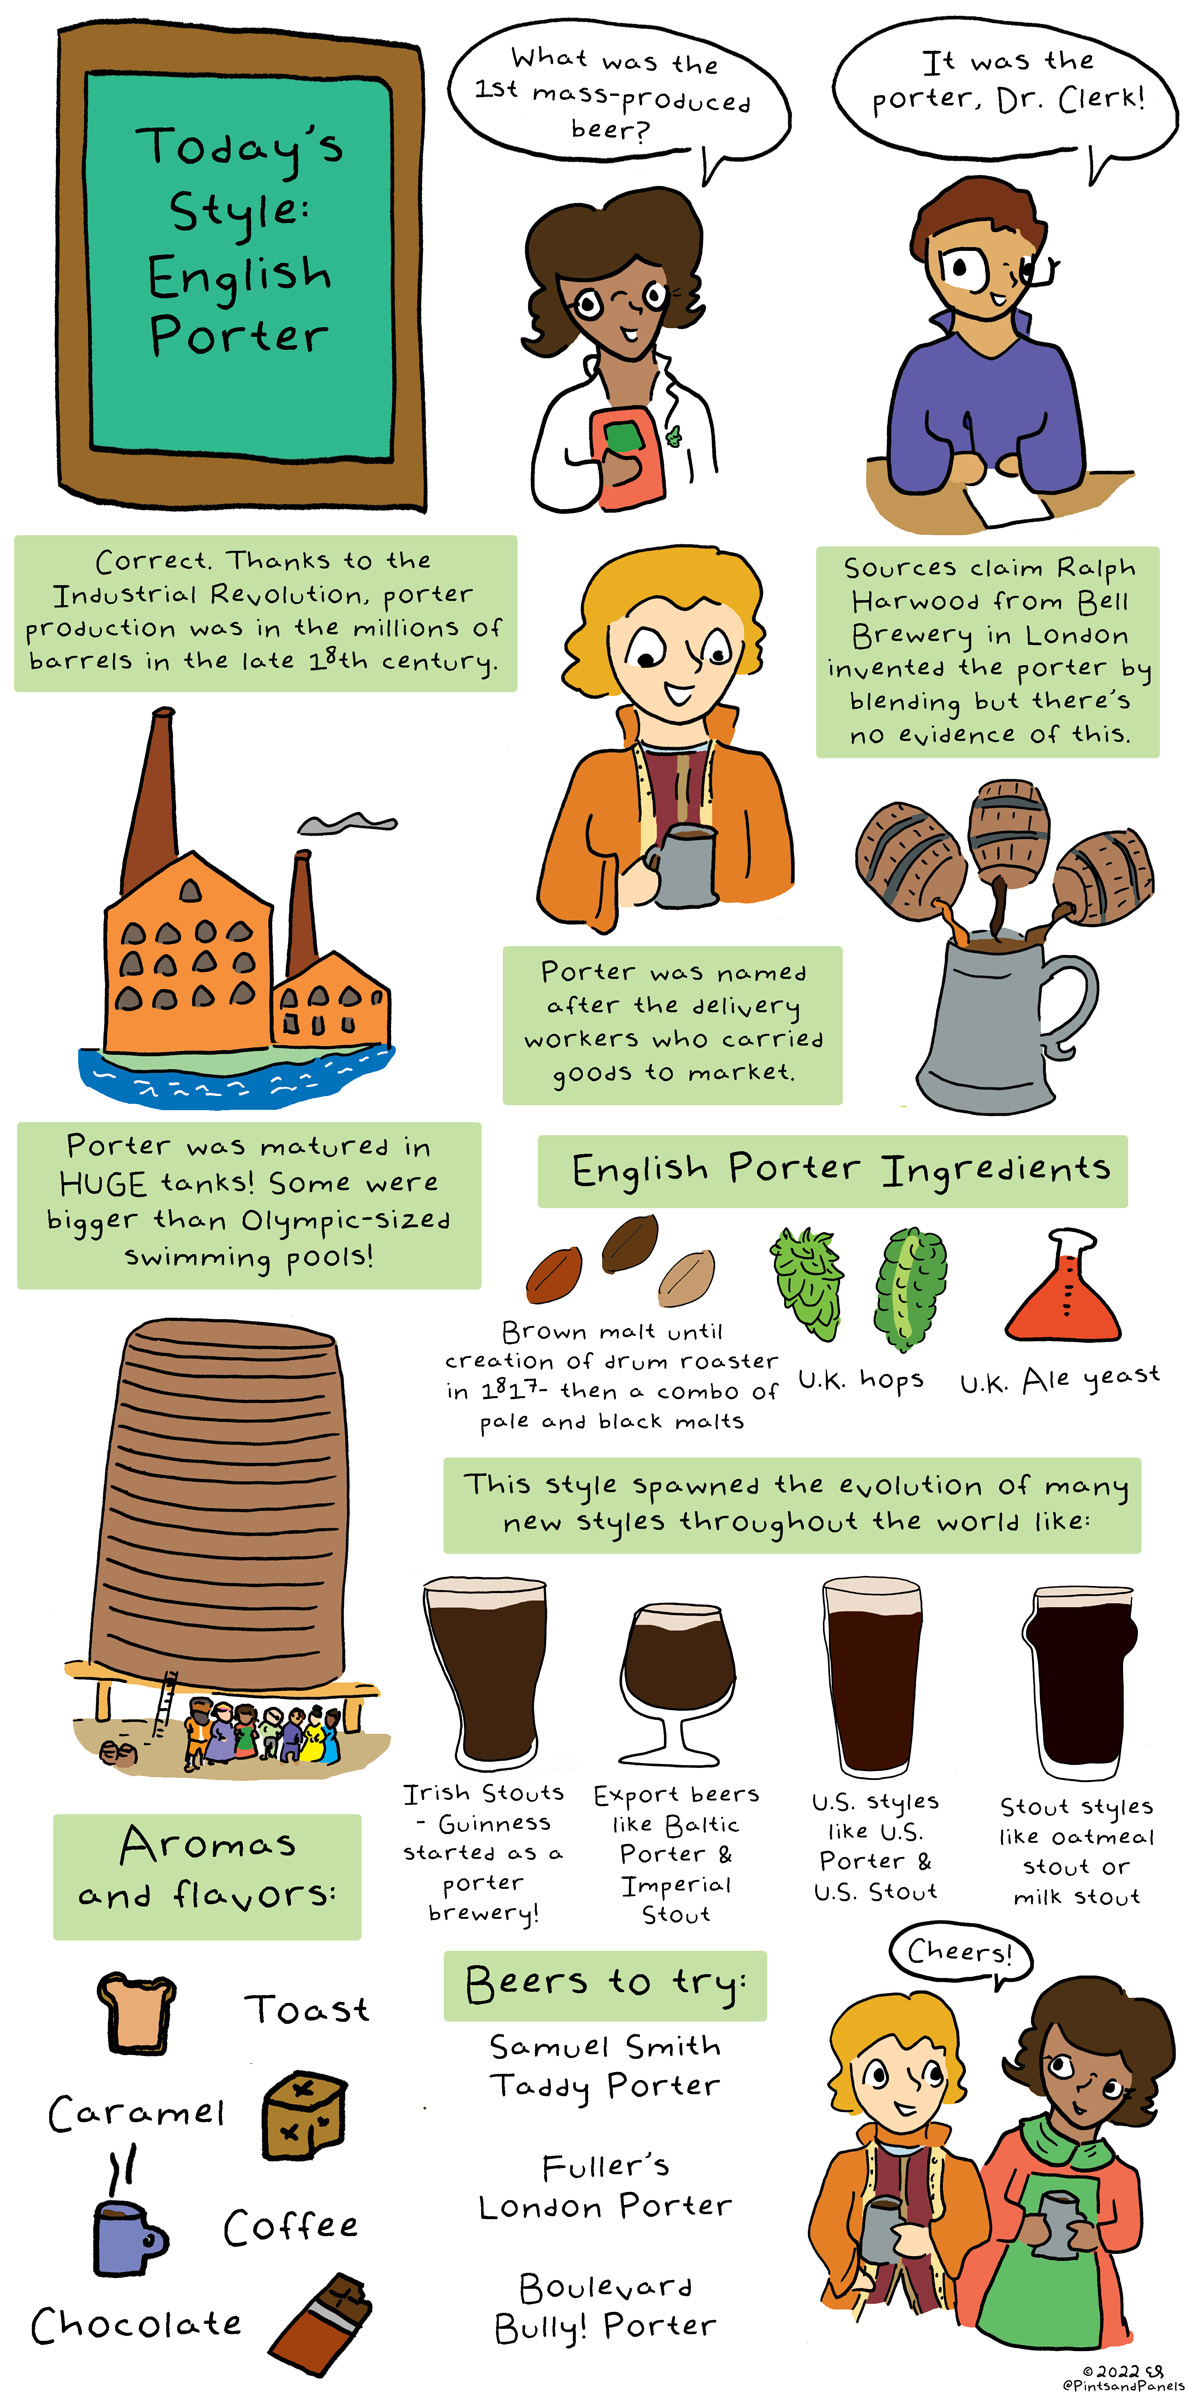 Comic featuring history of English Porter, flavor profile, ingredients, brands